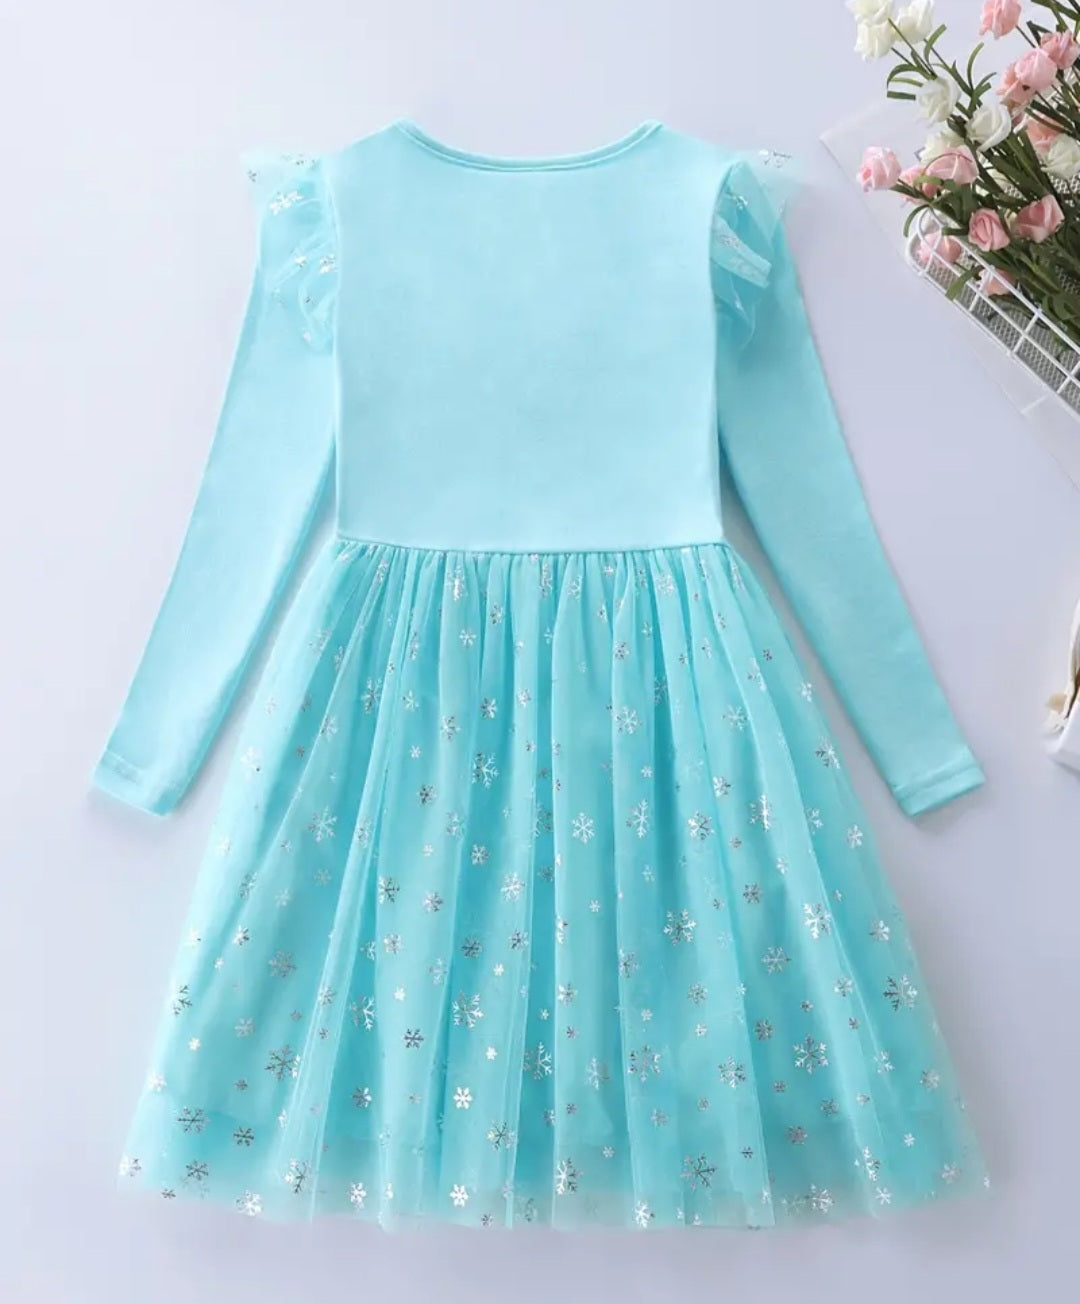 Blue Snow Princess Dress with Embroidered Snowflake